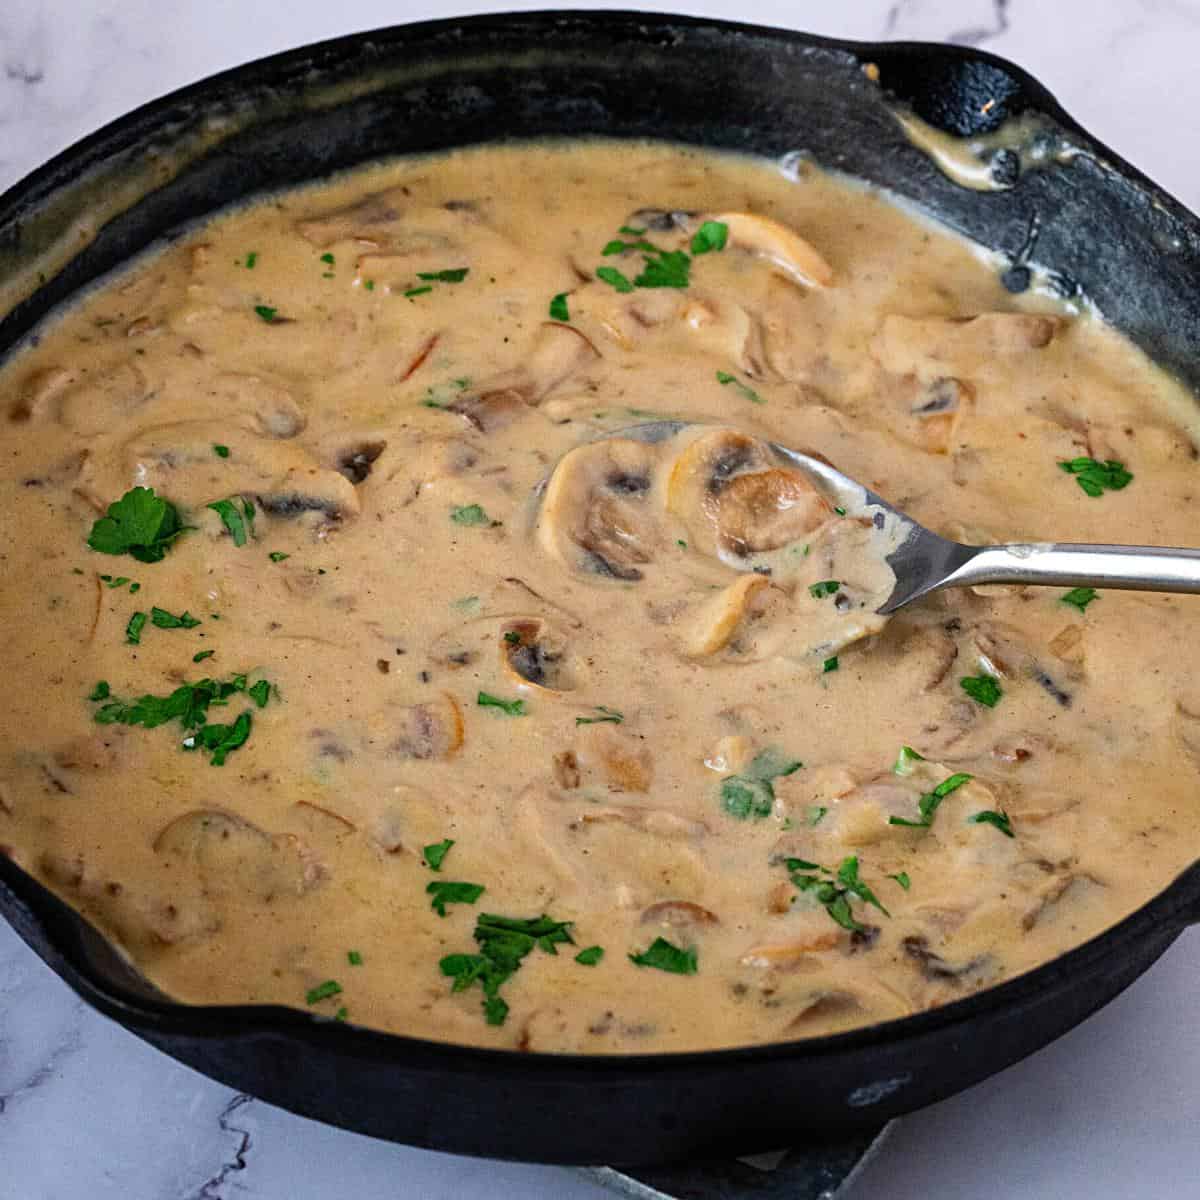 A skillet with mushrooms sauce.